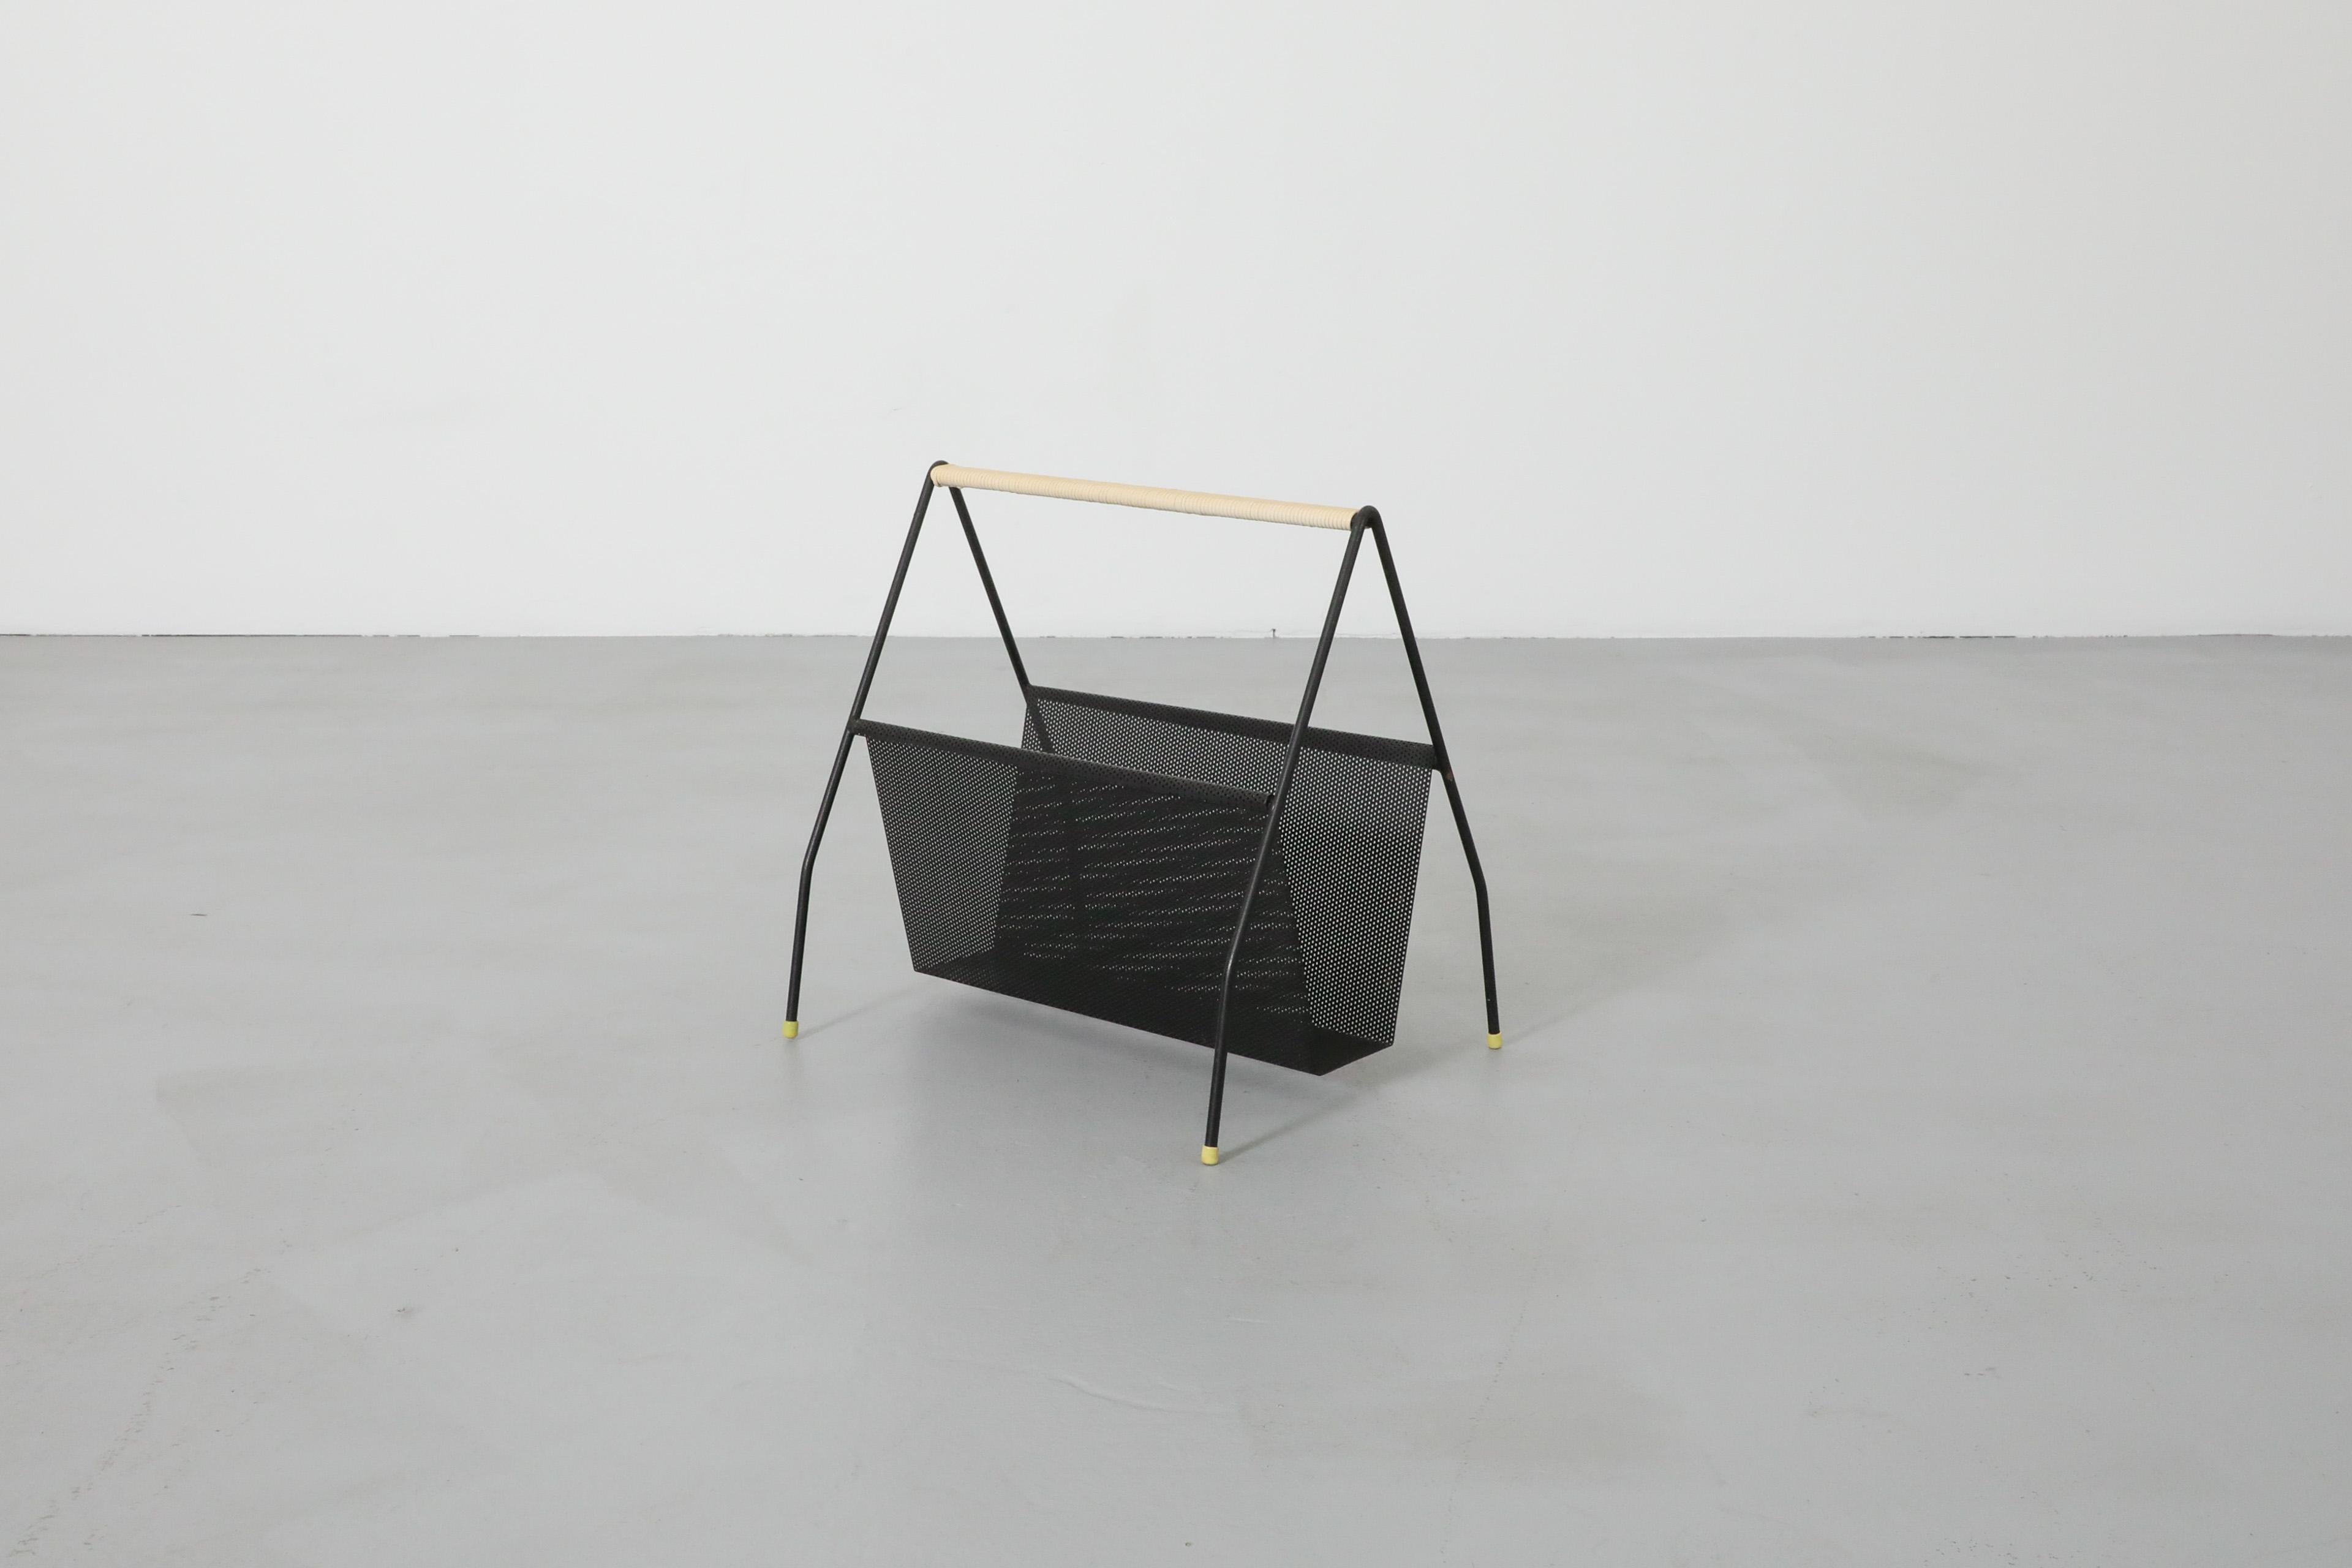 Mid-Century Artimeta magazine rack with black enameled frame and perforated basket attributed to Mathieu Mategot. This stunningly simple designed magazine holder has a simple 